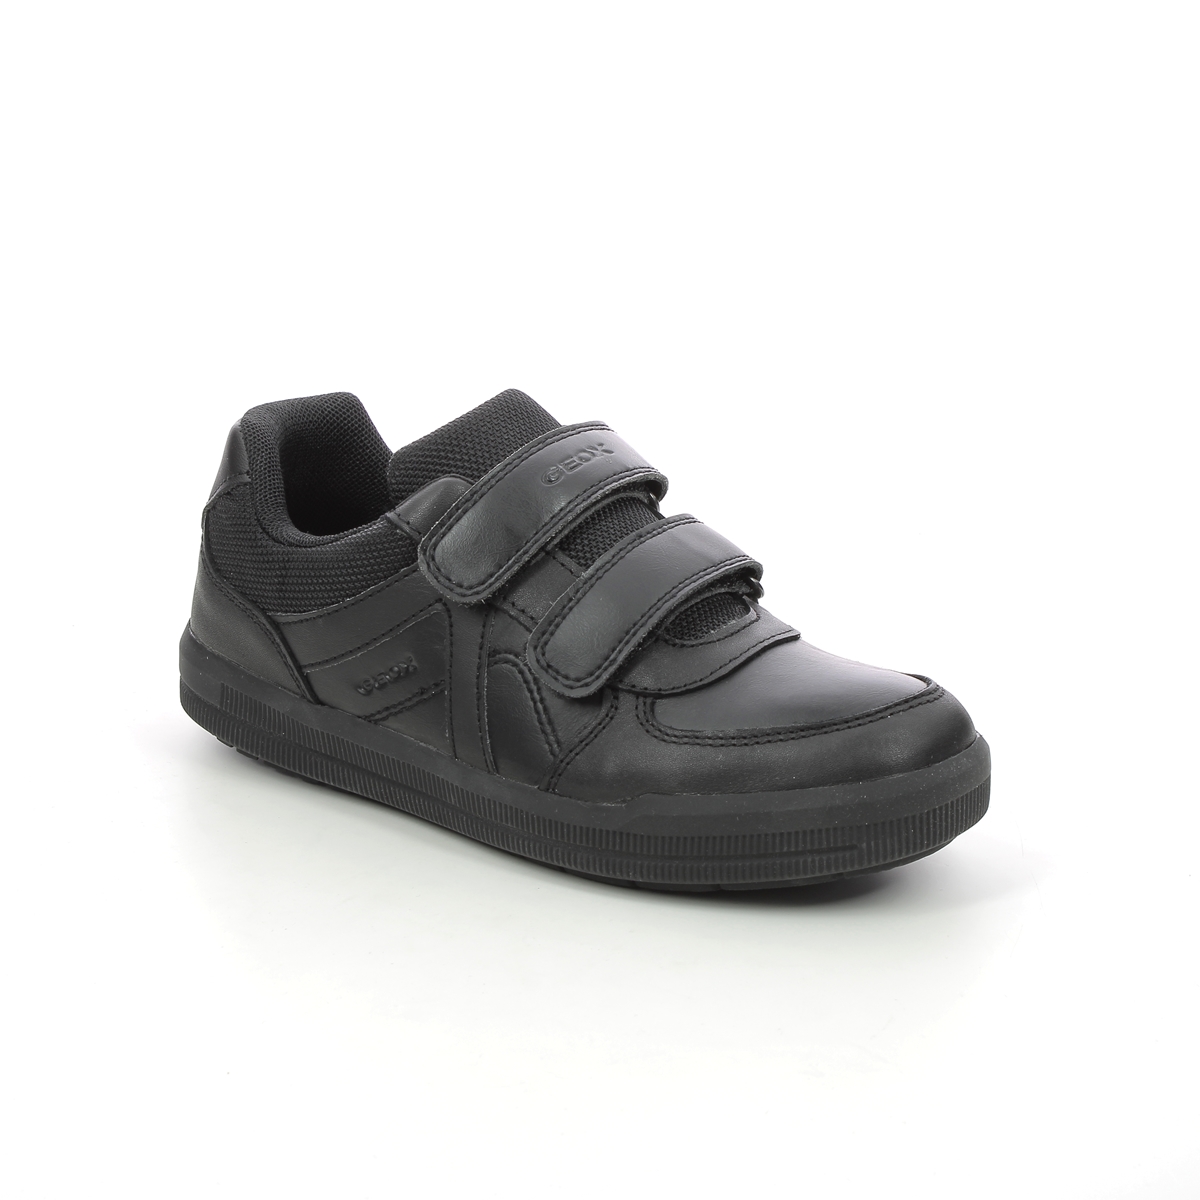 Geox - Arzach Boy Vel (Black Leather) J844Ae-C9999 In Size 35 In Plain Black Leather For School For kids